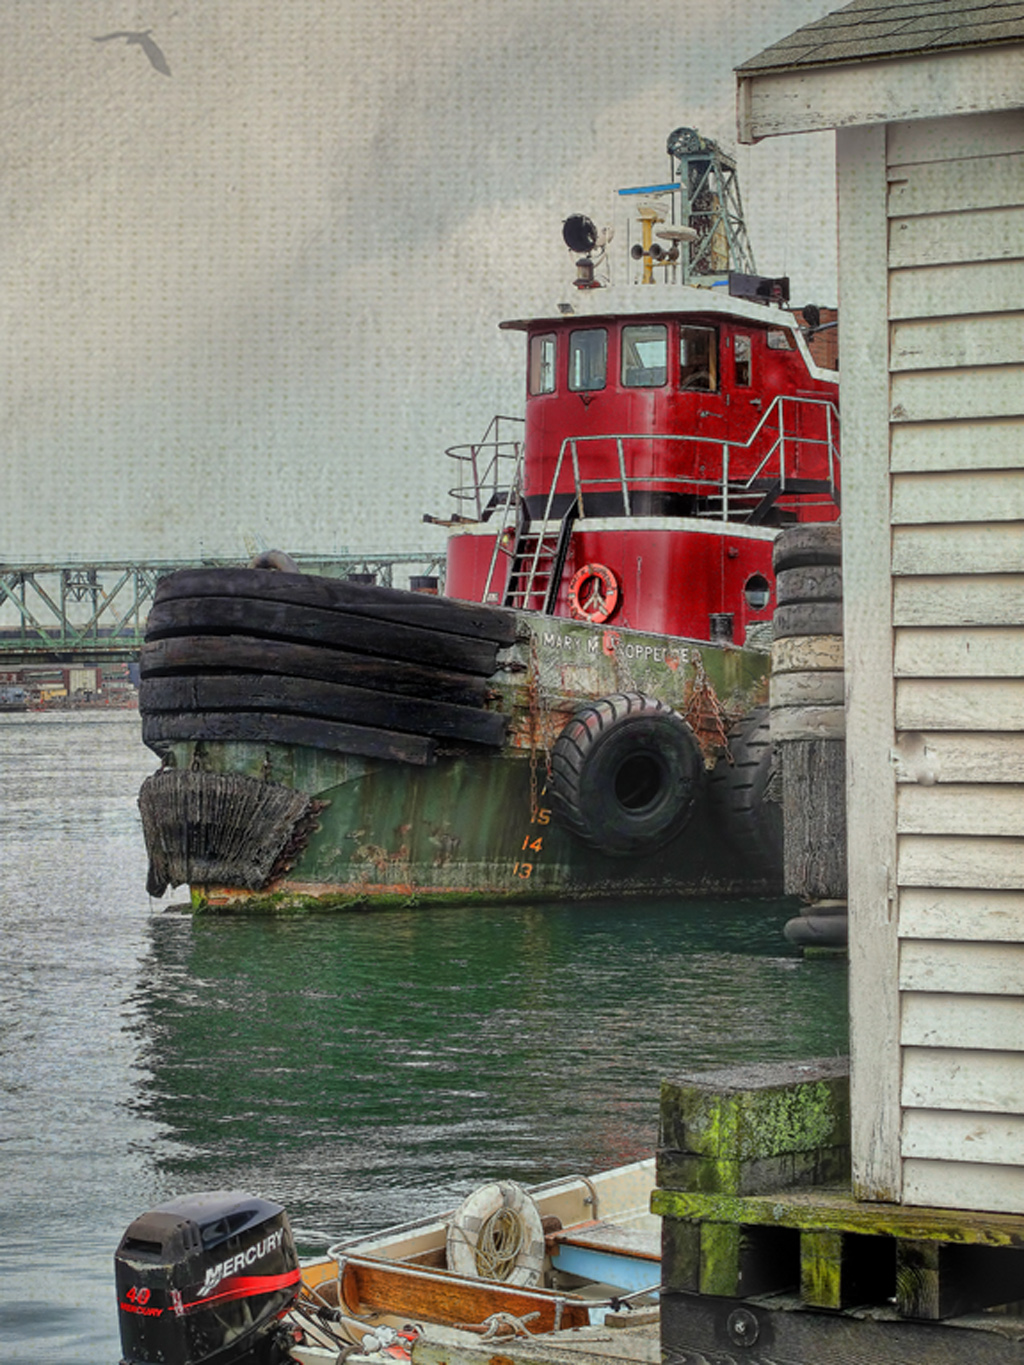 One Tug (user submitted)